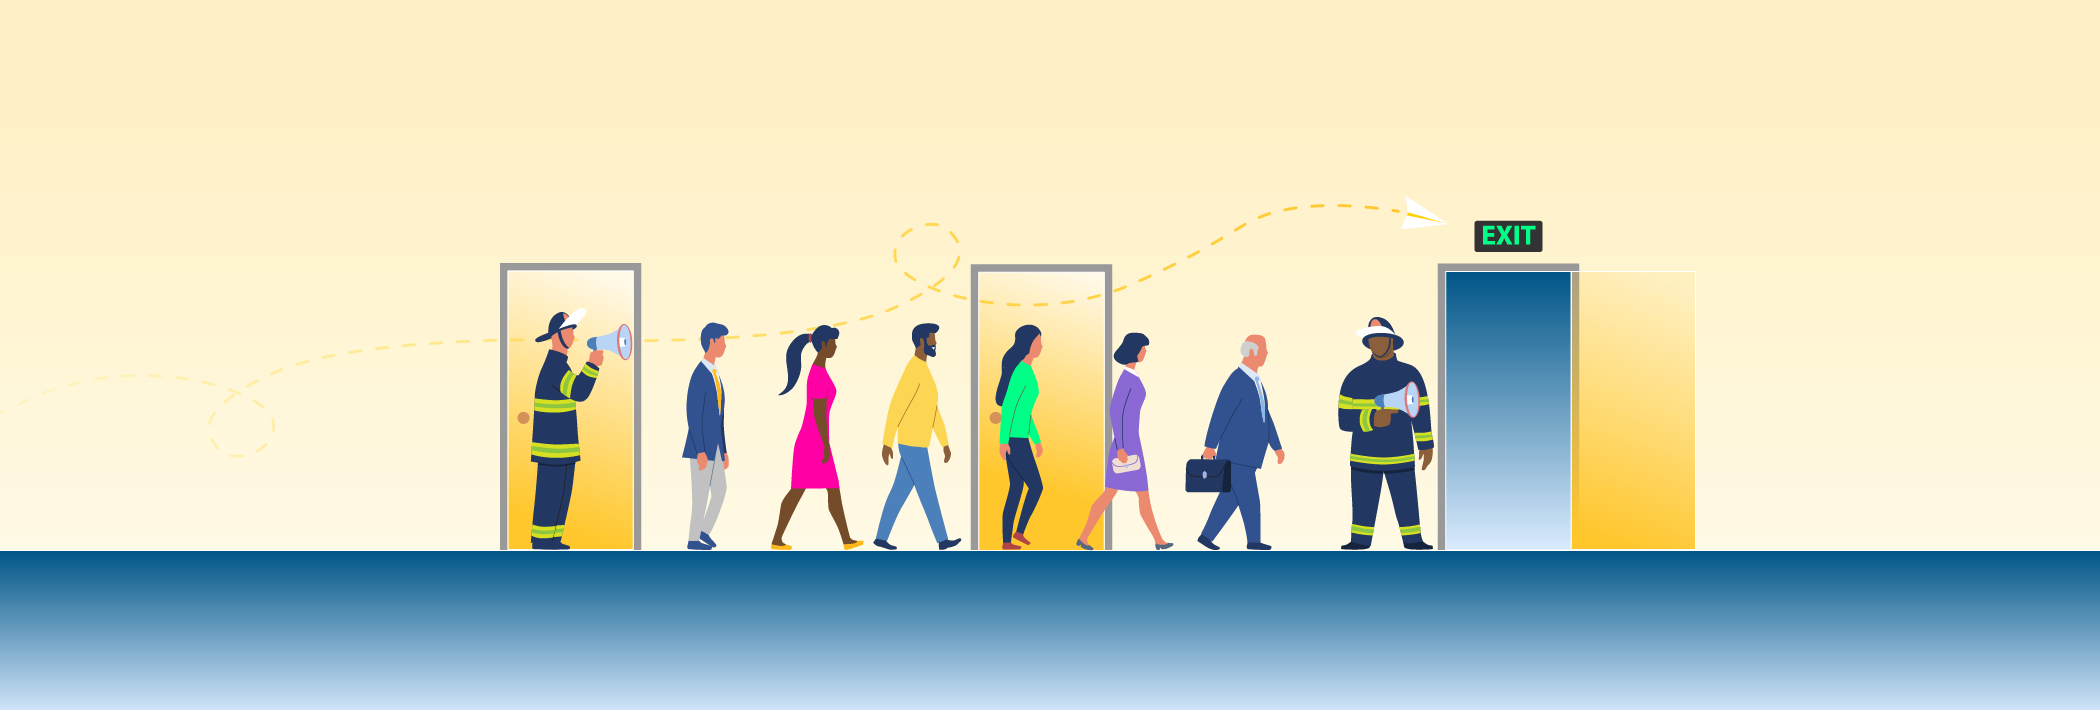 Bruin first responders guide evacuees to safety during an emergency